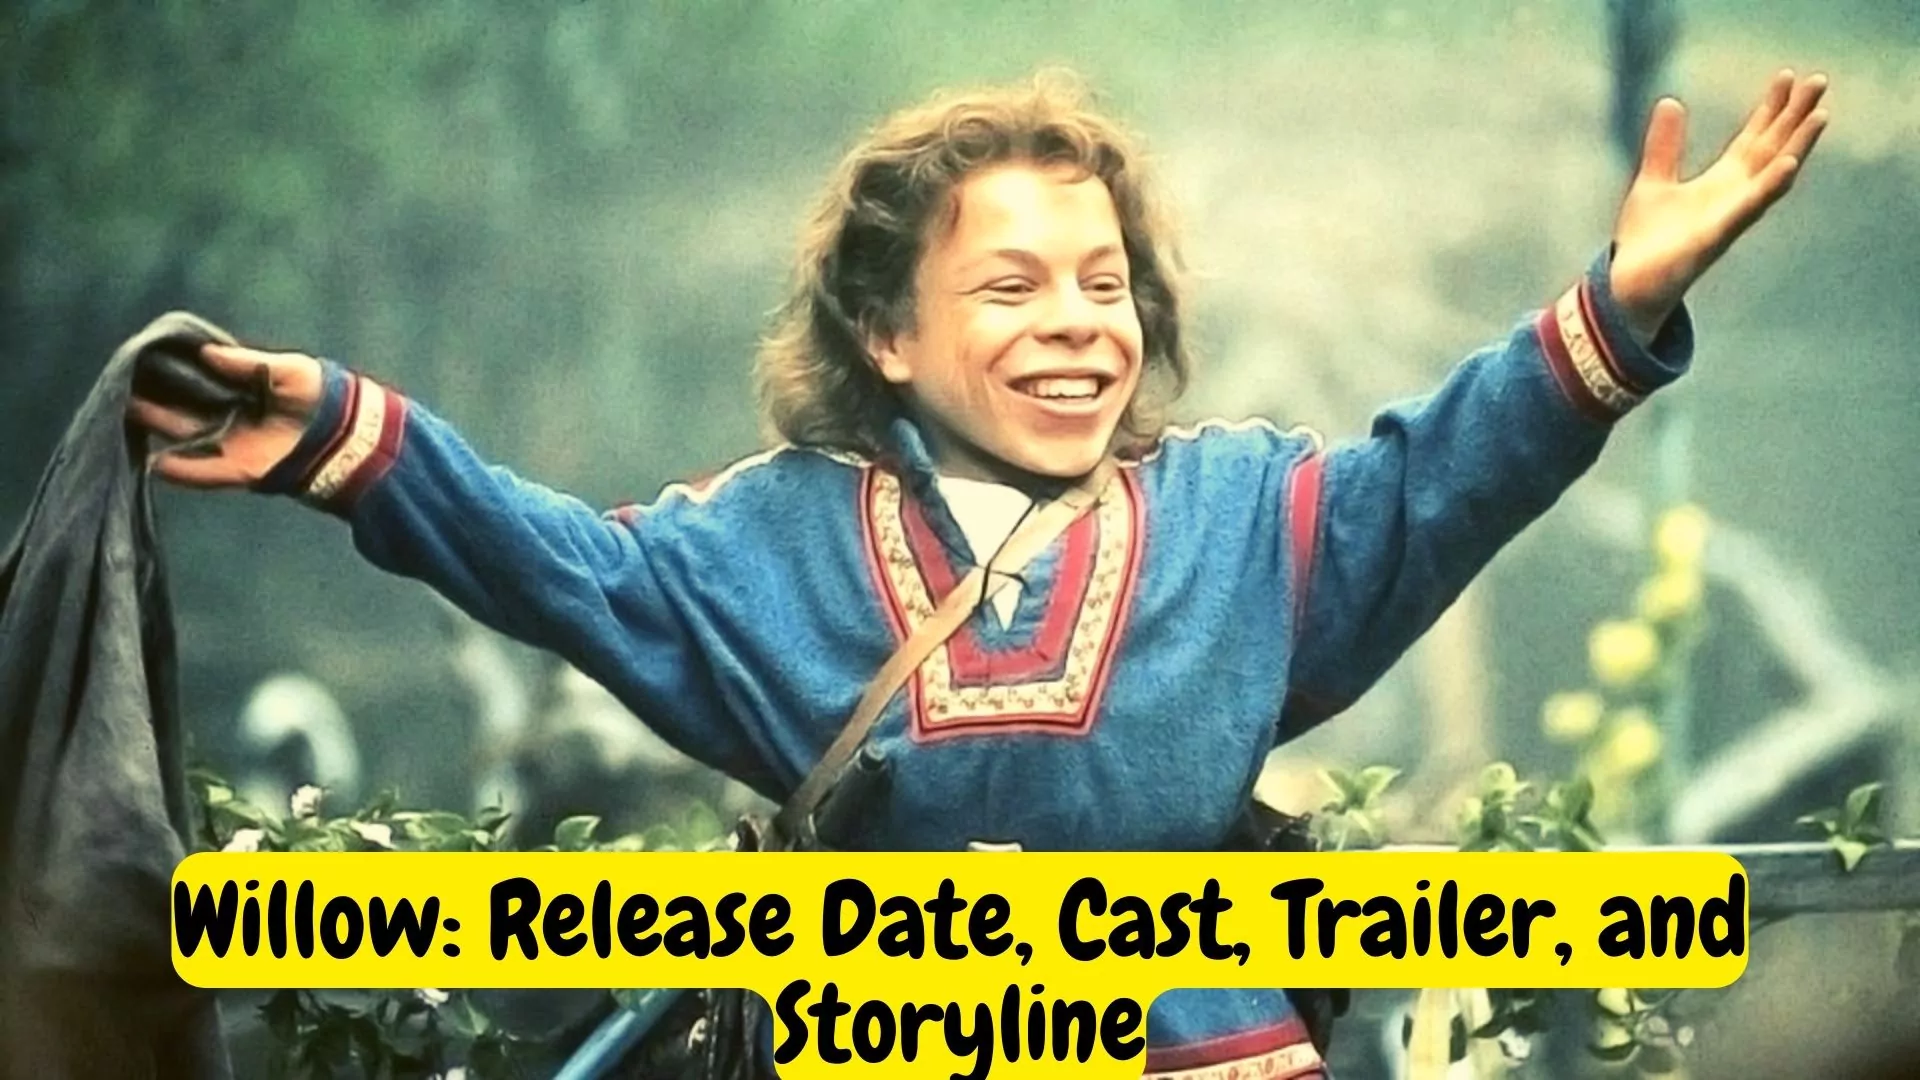 Willow: Release Date, Cast, Trailer, and Storyline